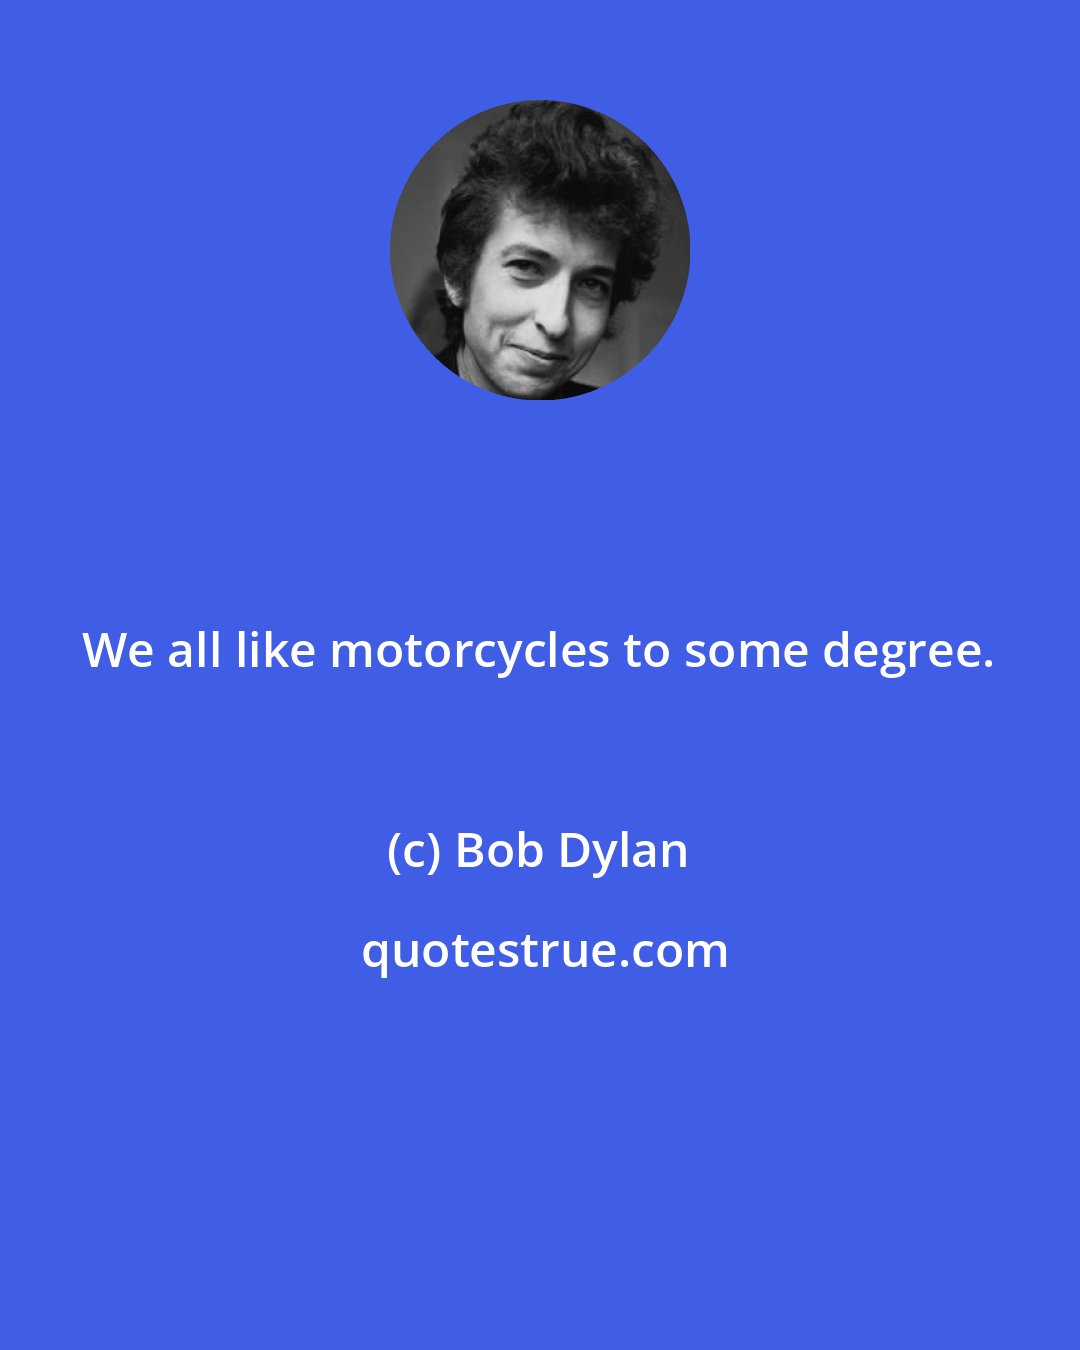 Bob Dylan: We all like motorcycles to some degree.